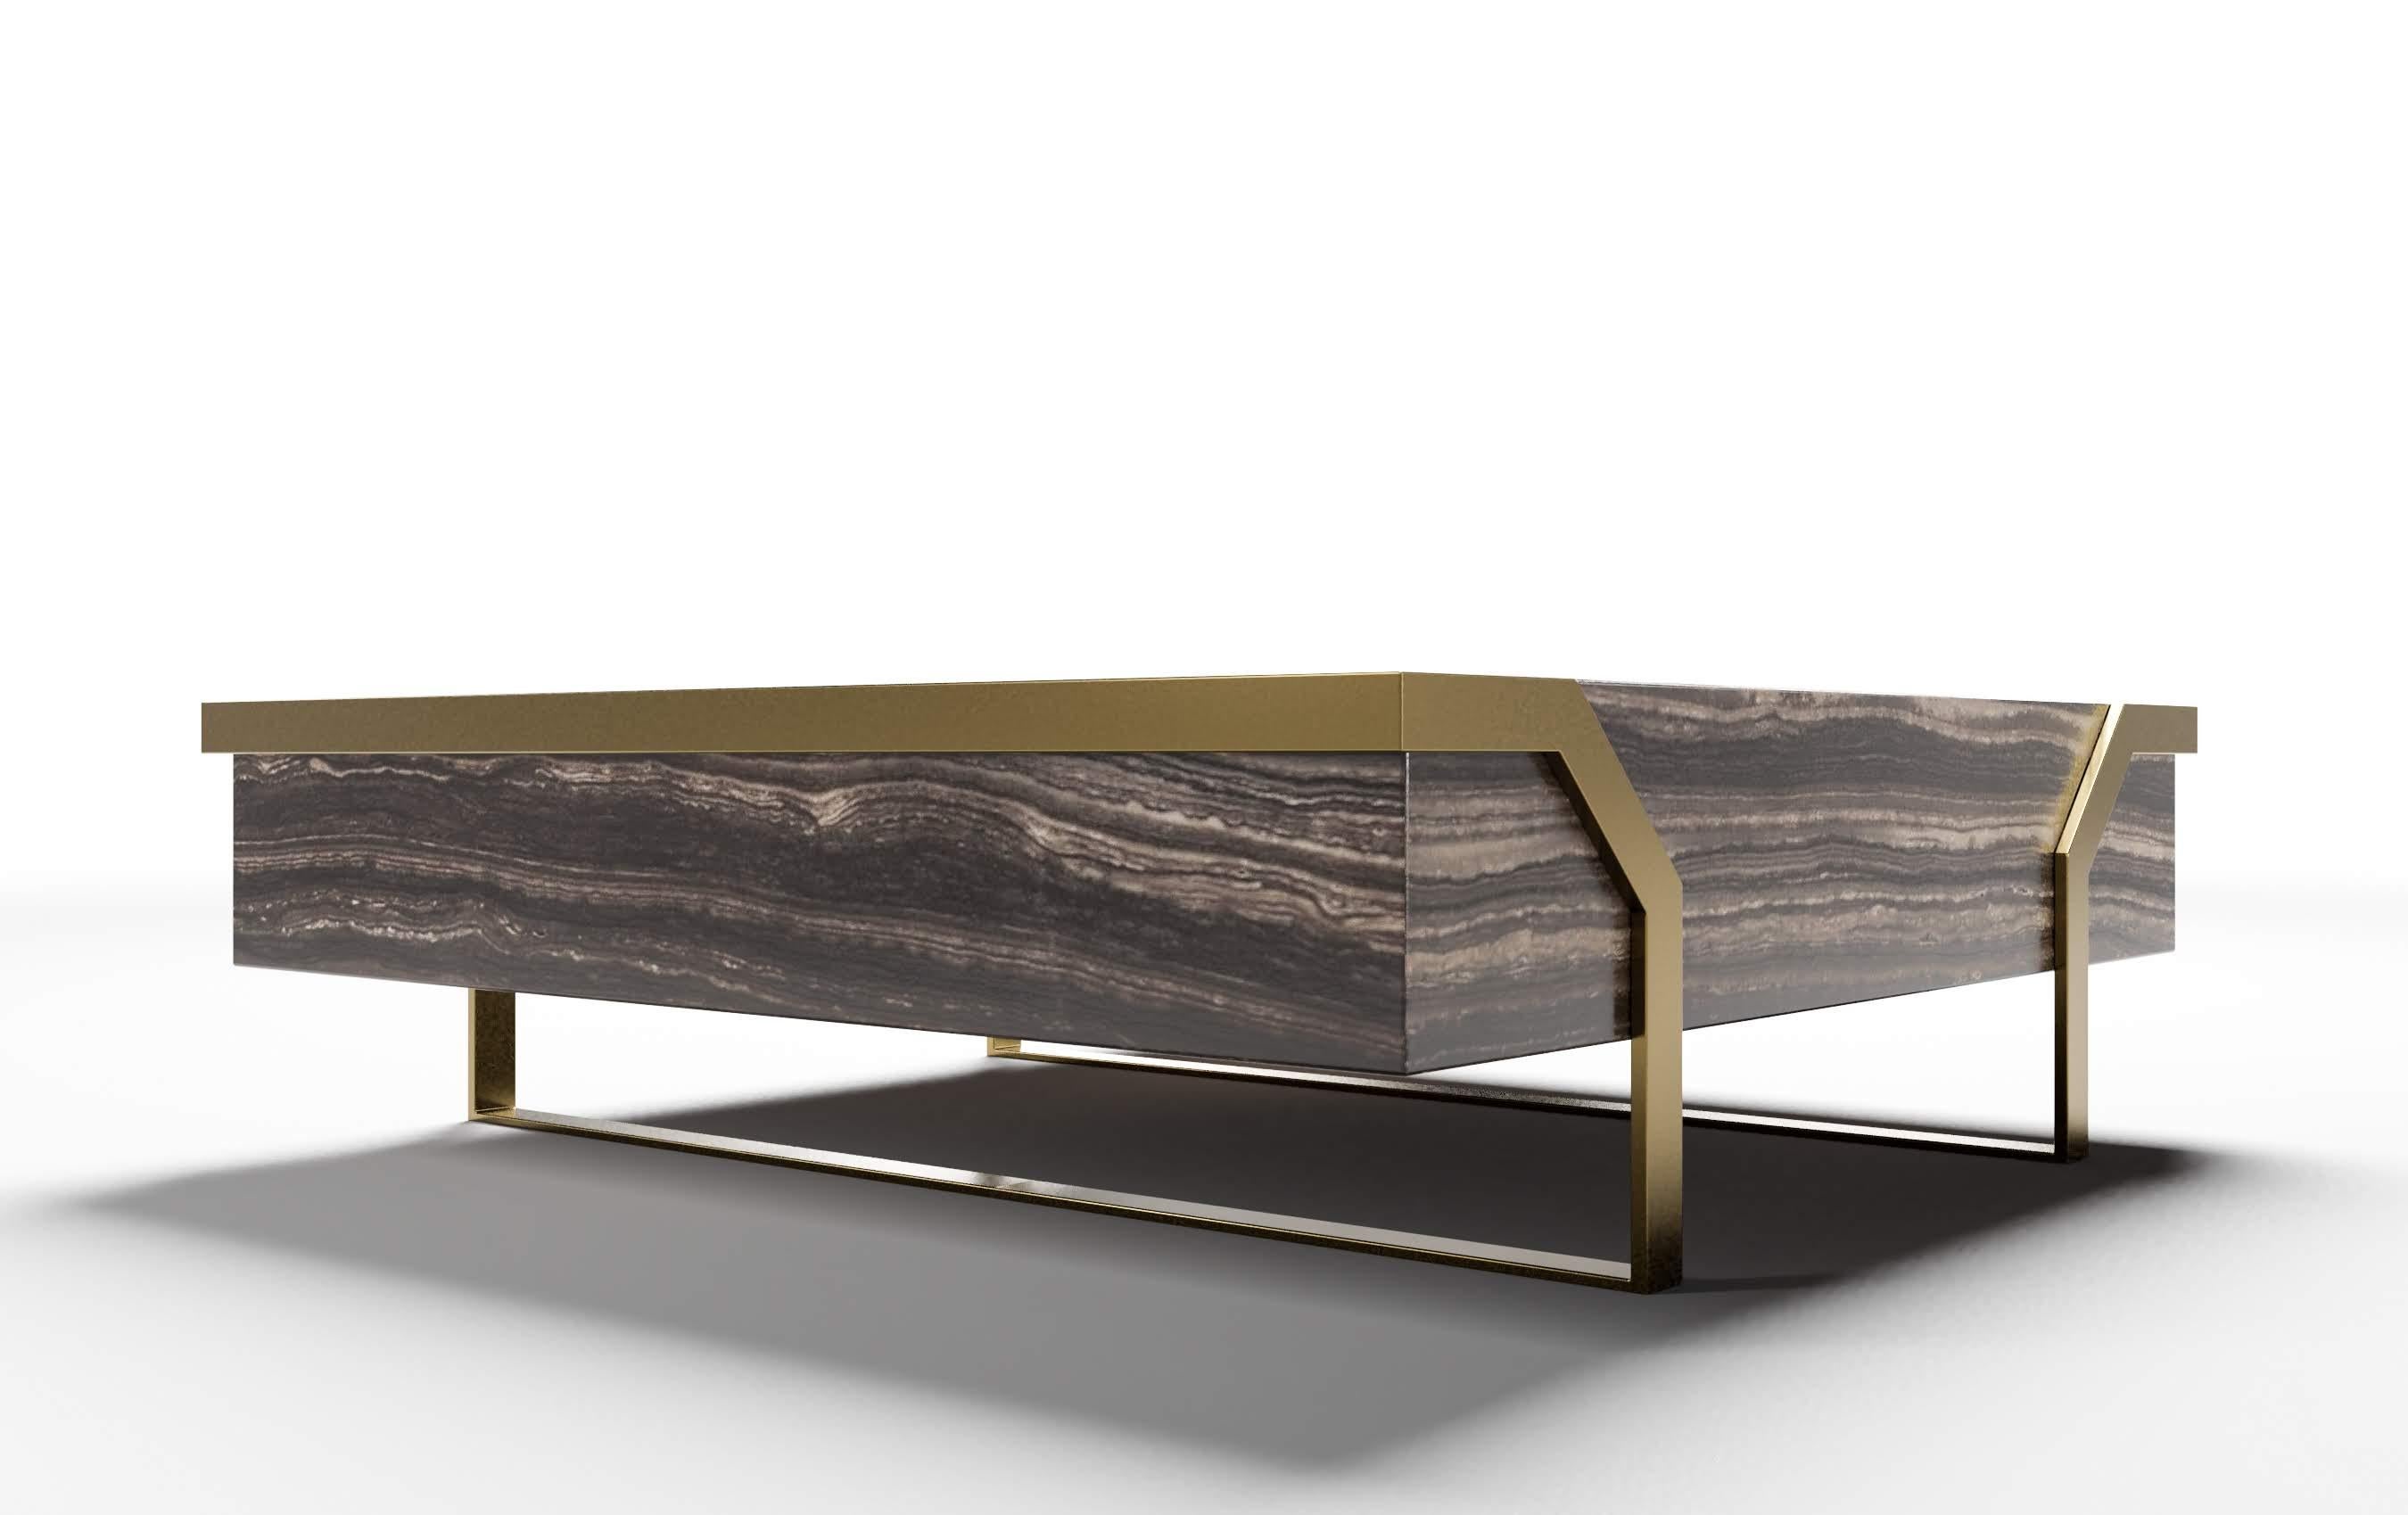 Italian HERMOSA COFFEE TABLE - Modern Design with Tobacco Marble Body and Lacquered Legs